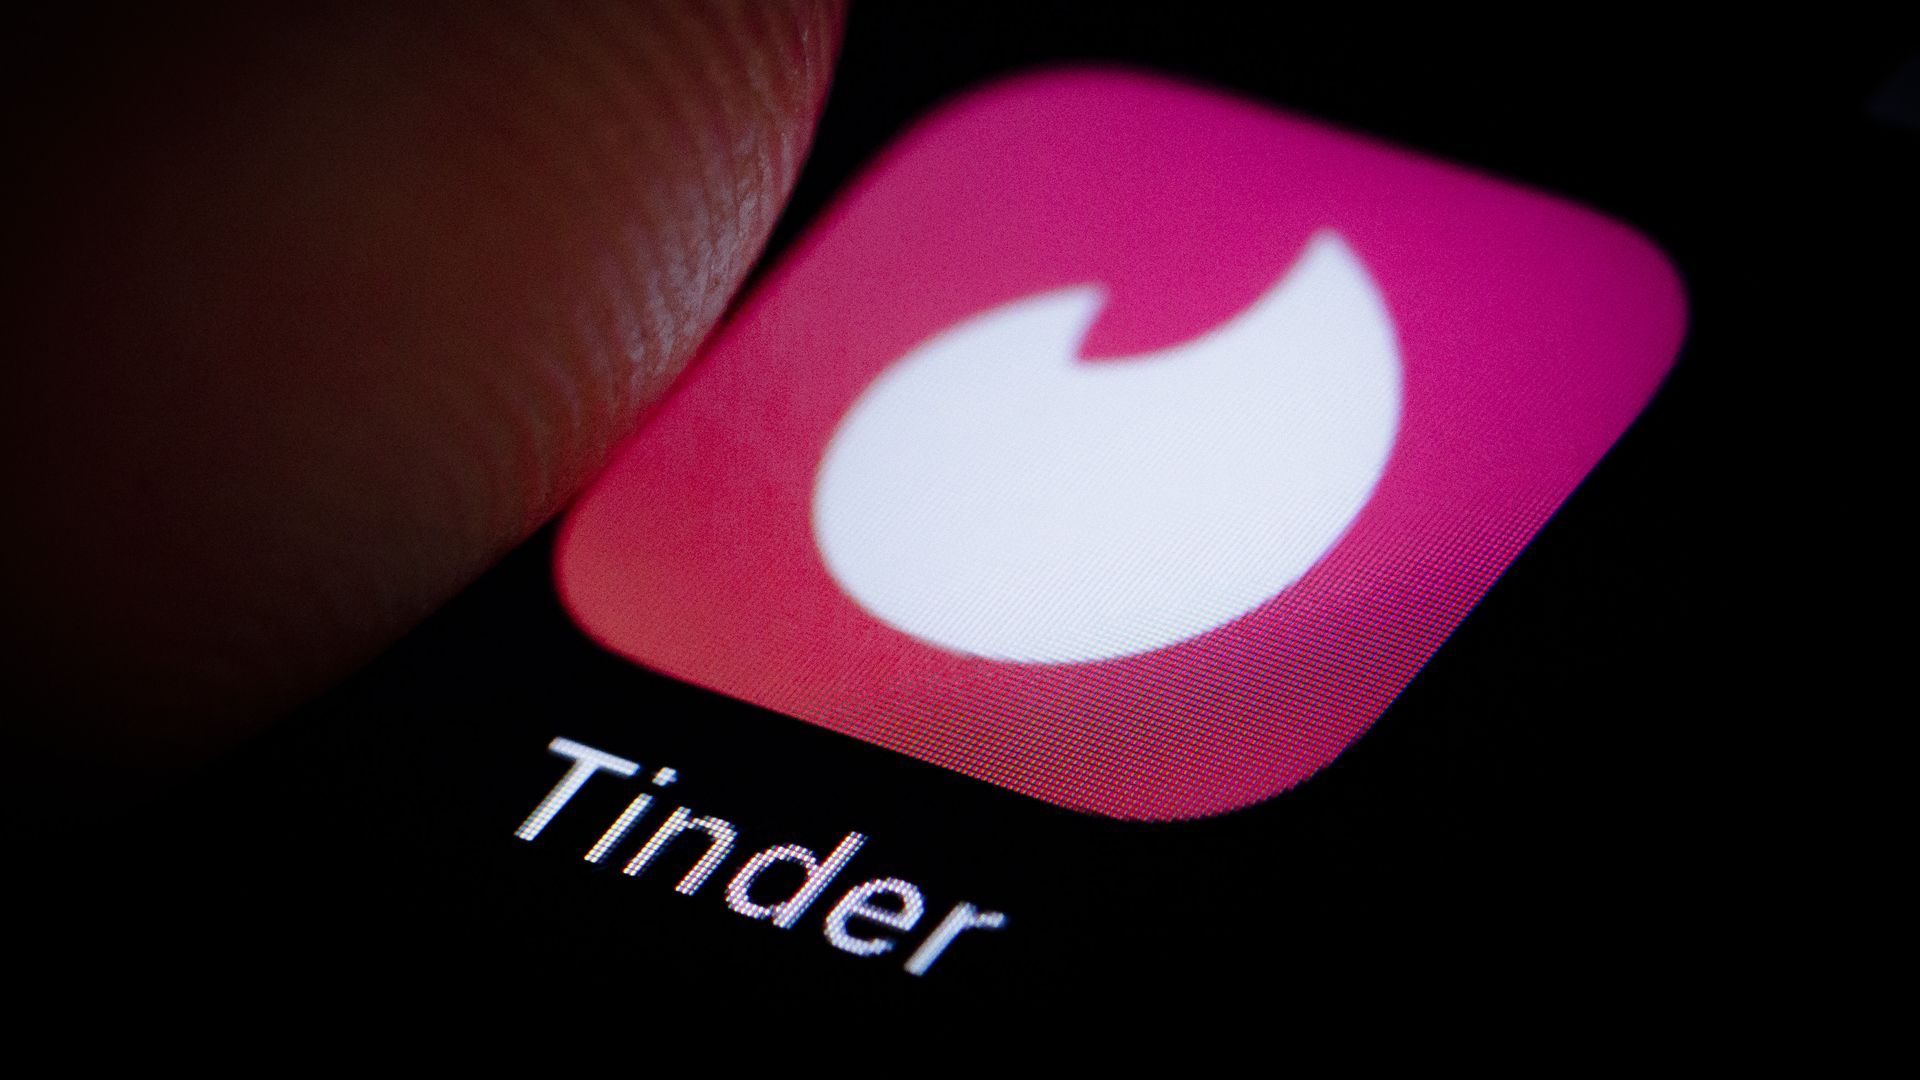 In this image, a finger hovers over the Tinder app logo on a persons phone.